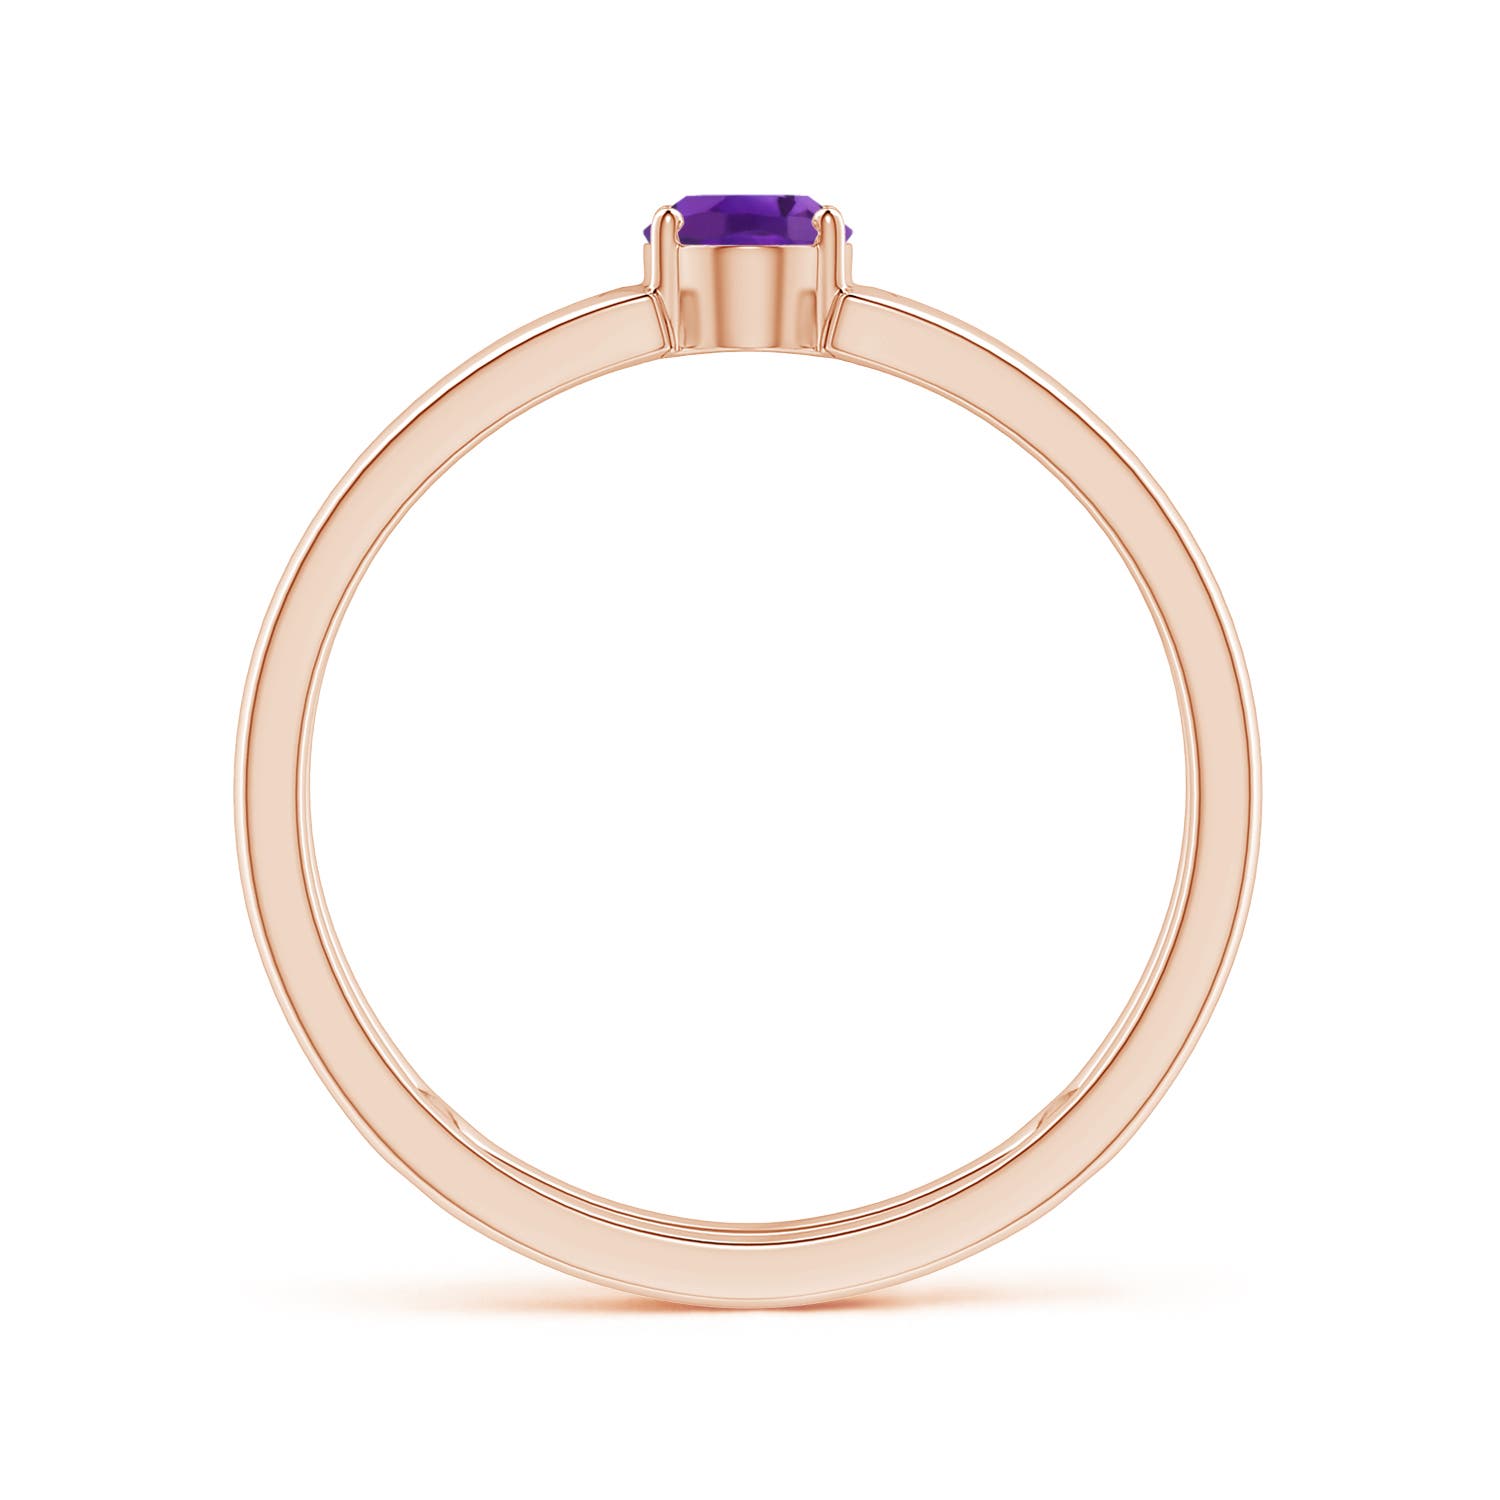 AAA - Amethyst / 0.4 CT / 14 KT Rose Gold